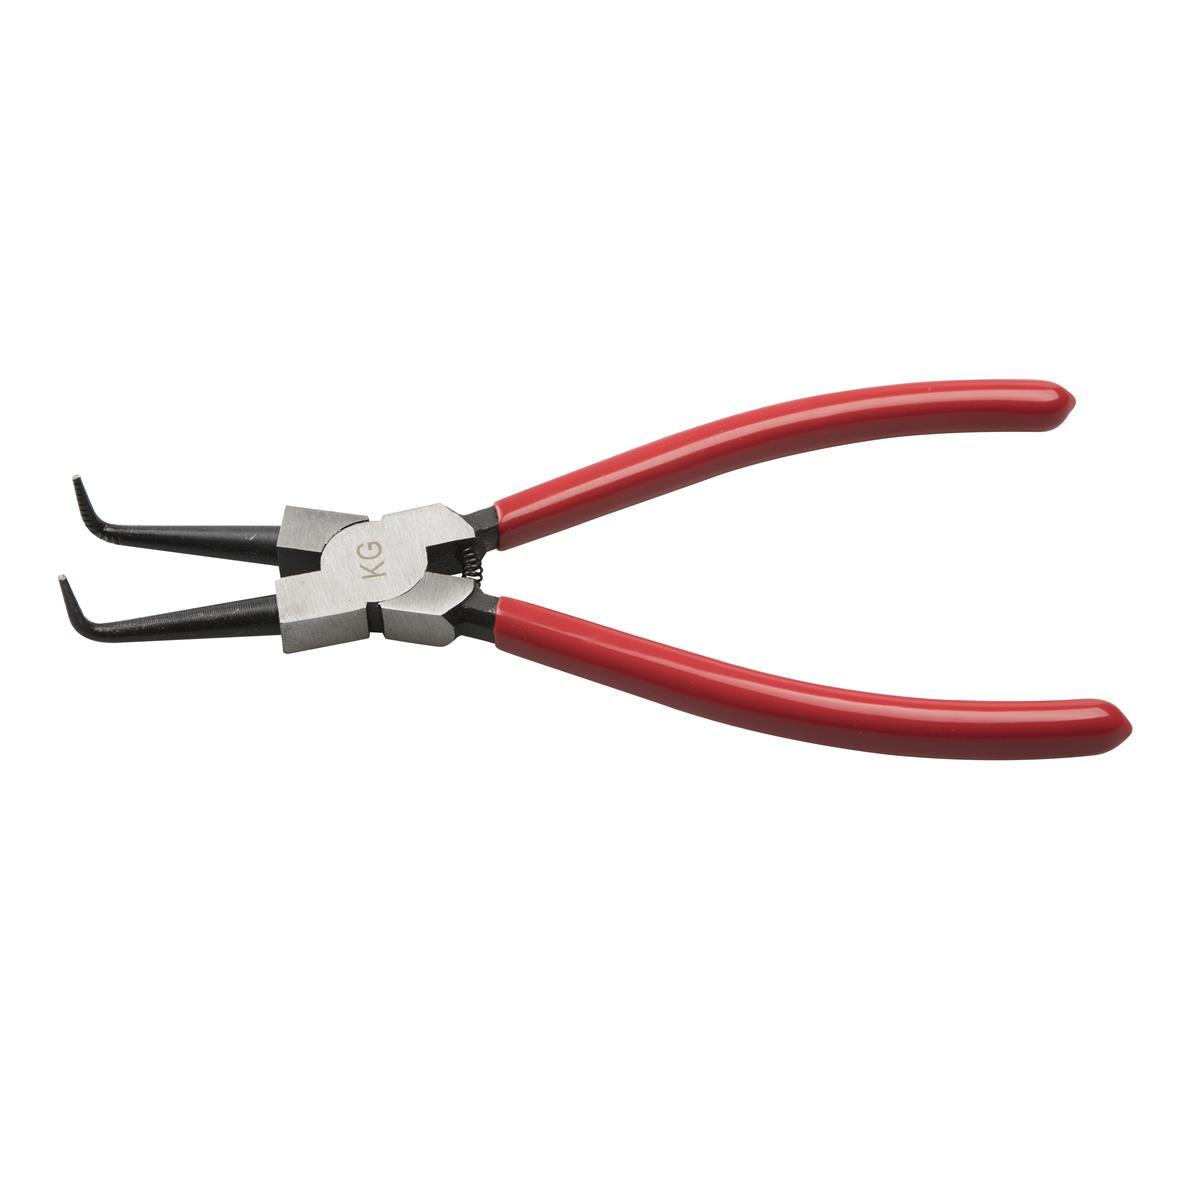 Cavity curved snap ring pliers